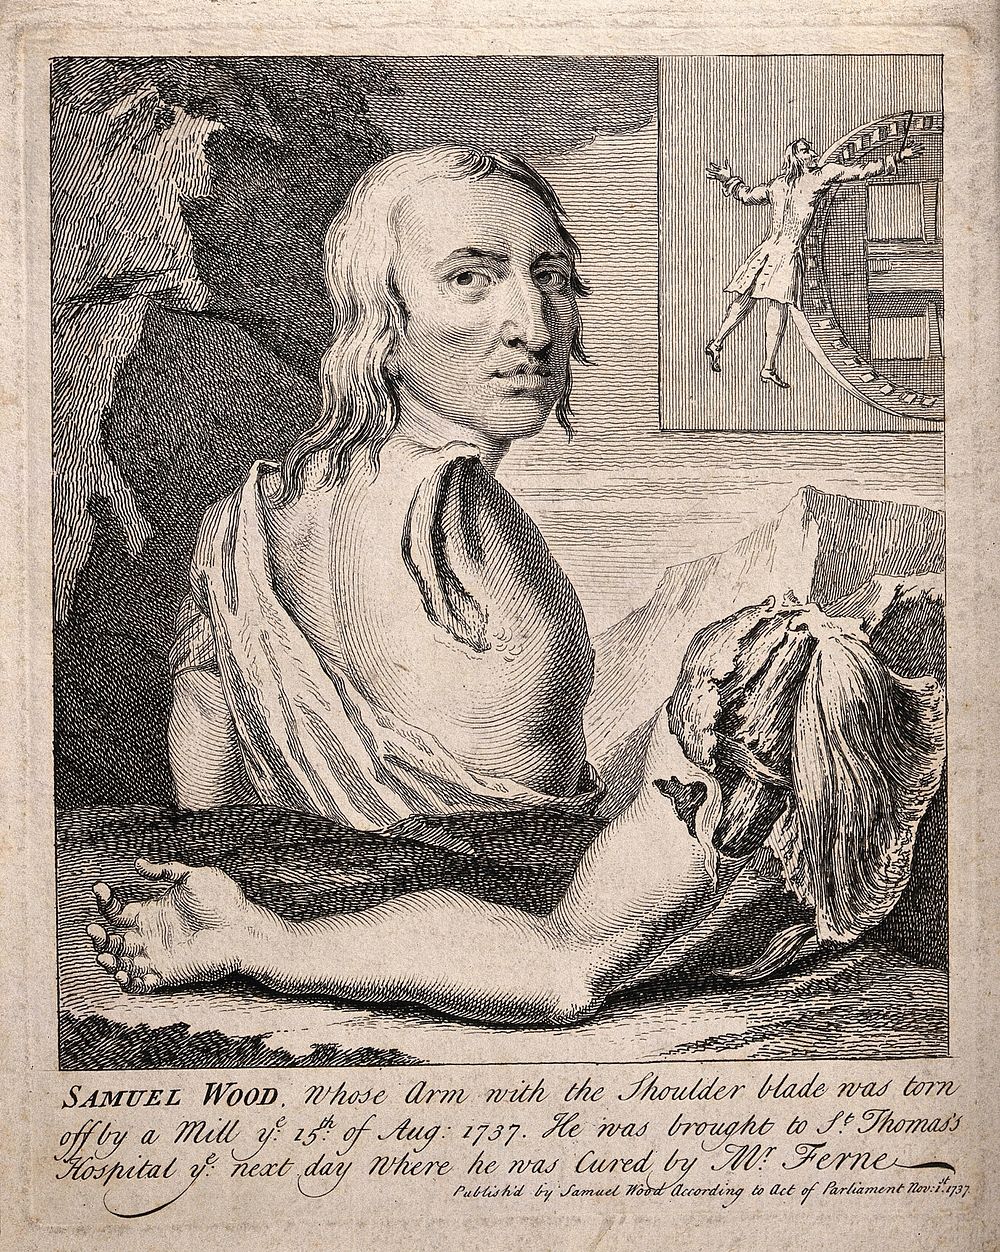 Samuel Wood, a man whose shoulder and arm were torn off in an accident at a mill. Engraving, 1737.